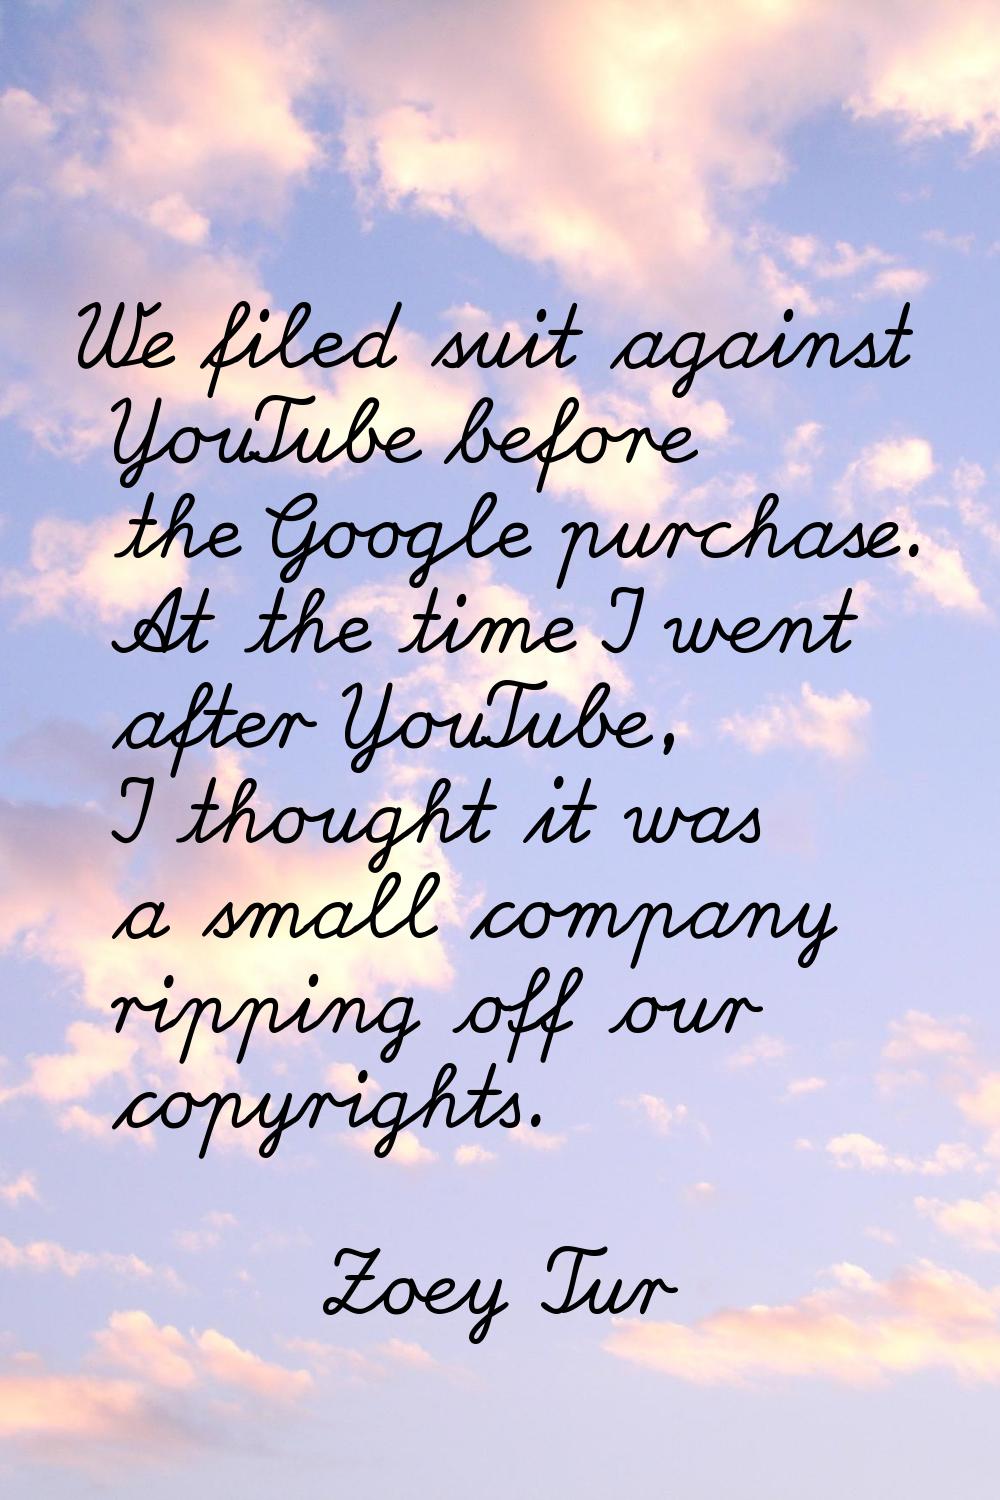 We filed suit against YouTube before the Google purchase. At the time I went after YouTube, I thoug